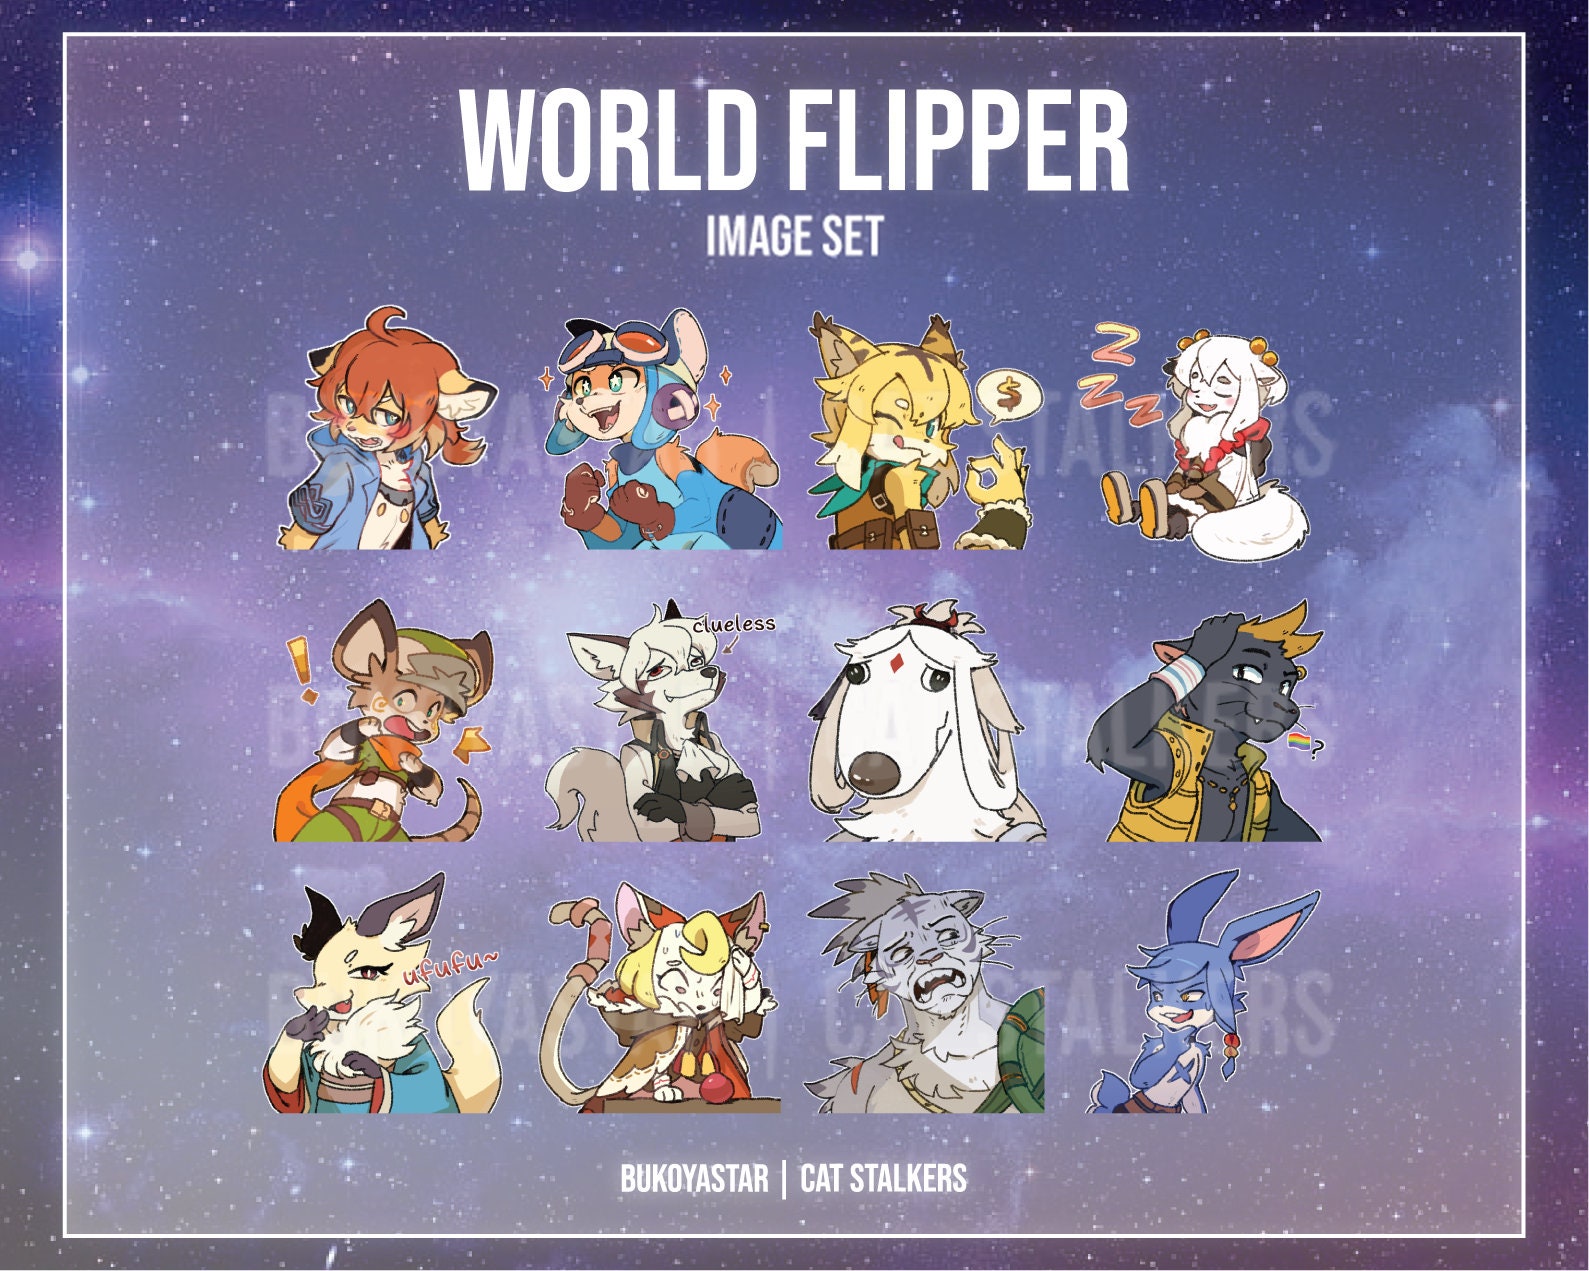 Is the FB login still messed up for you guys? : r/worldflipper